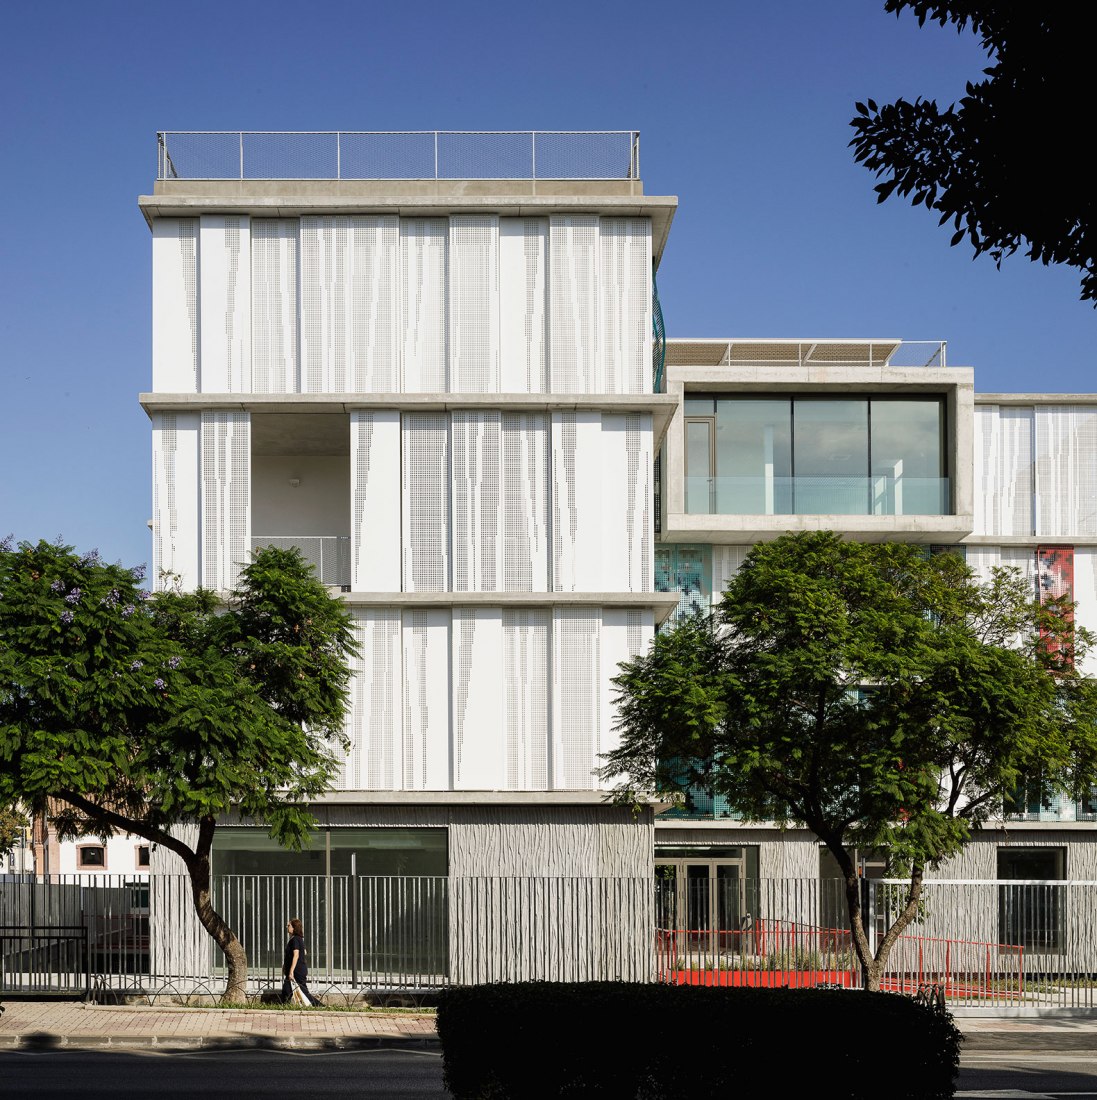 Red Cross office complex by endosdedos arquitectura. Photograph by Fernando Alda.